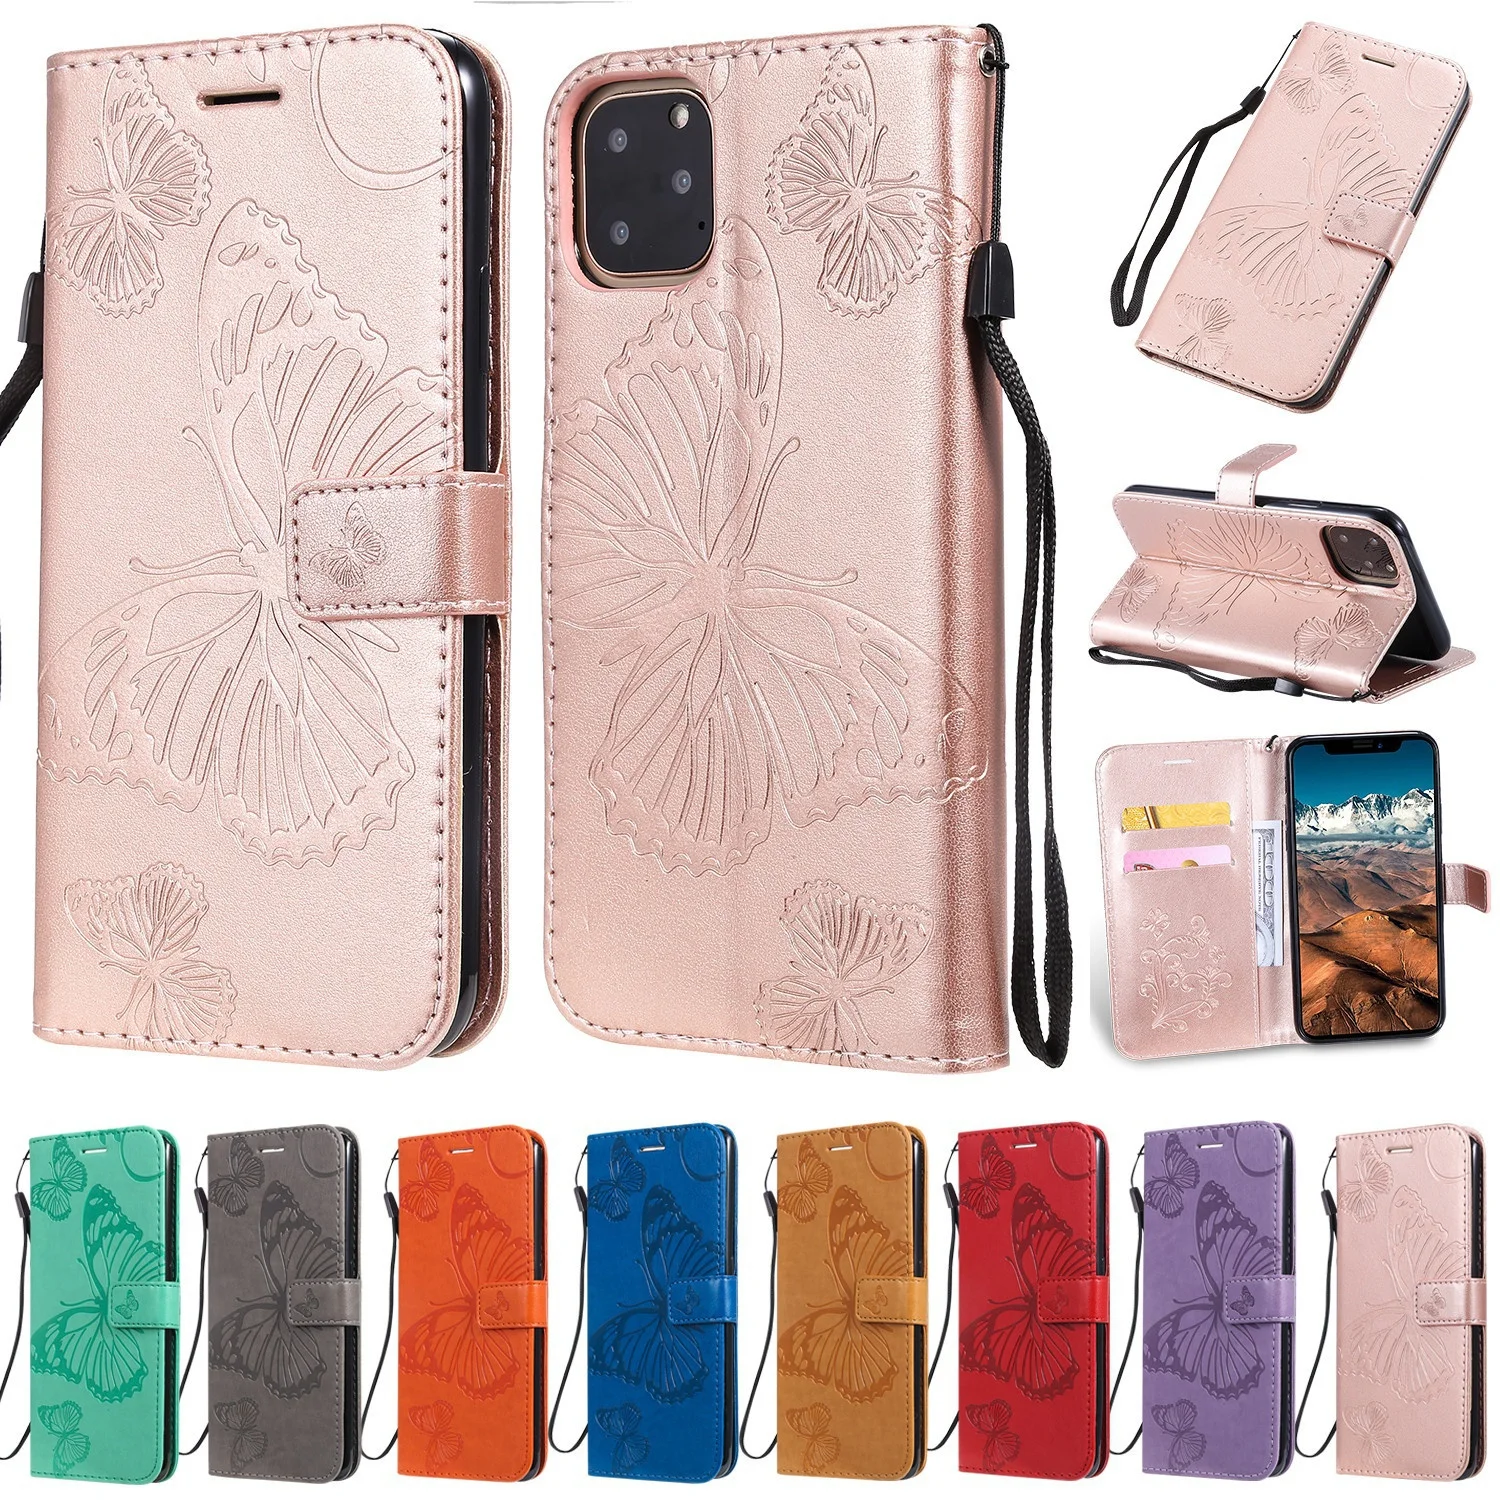 

3D Butterfly Embossed Leather Flip Phone Case with Card Slot for Xiaomi 9 lite/A3 lite/CC9E/A3/9 pro/CC9 pro/note 10/note 10 pro